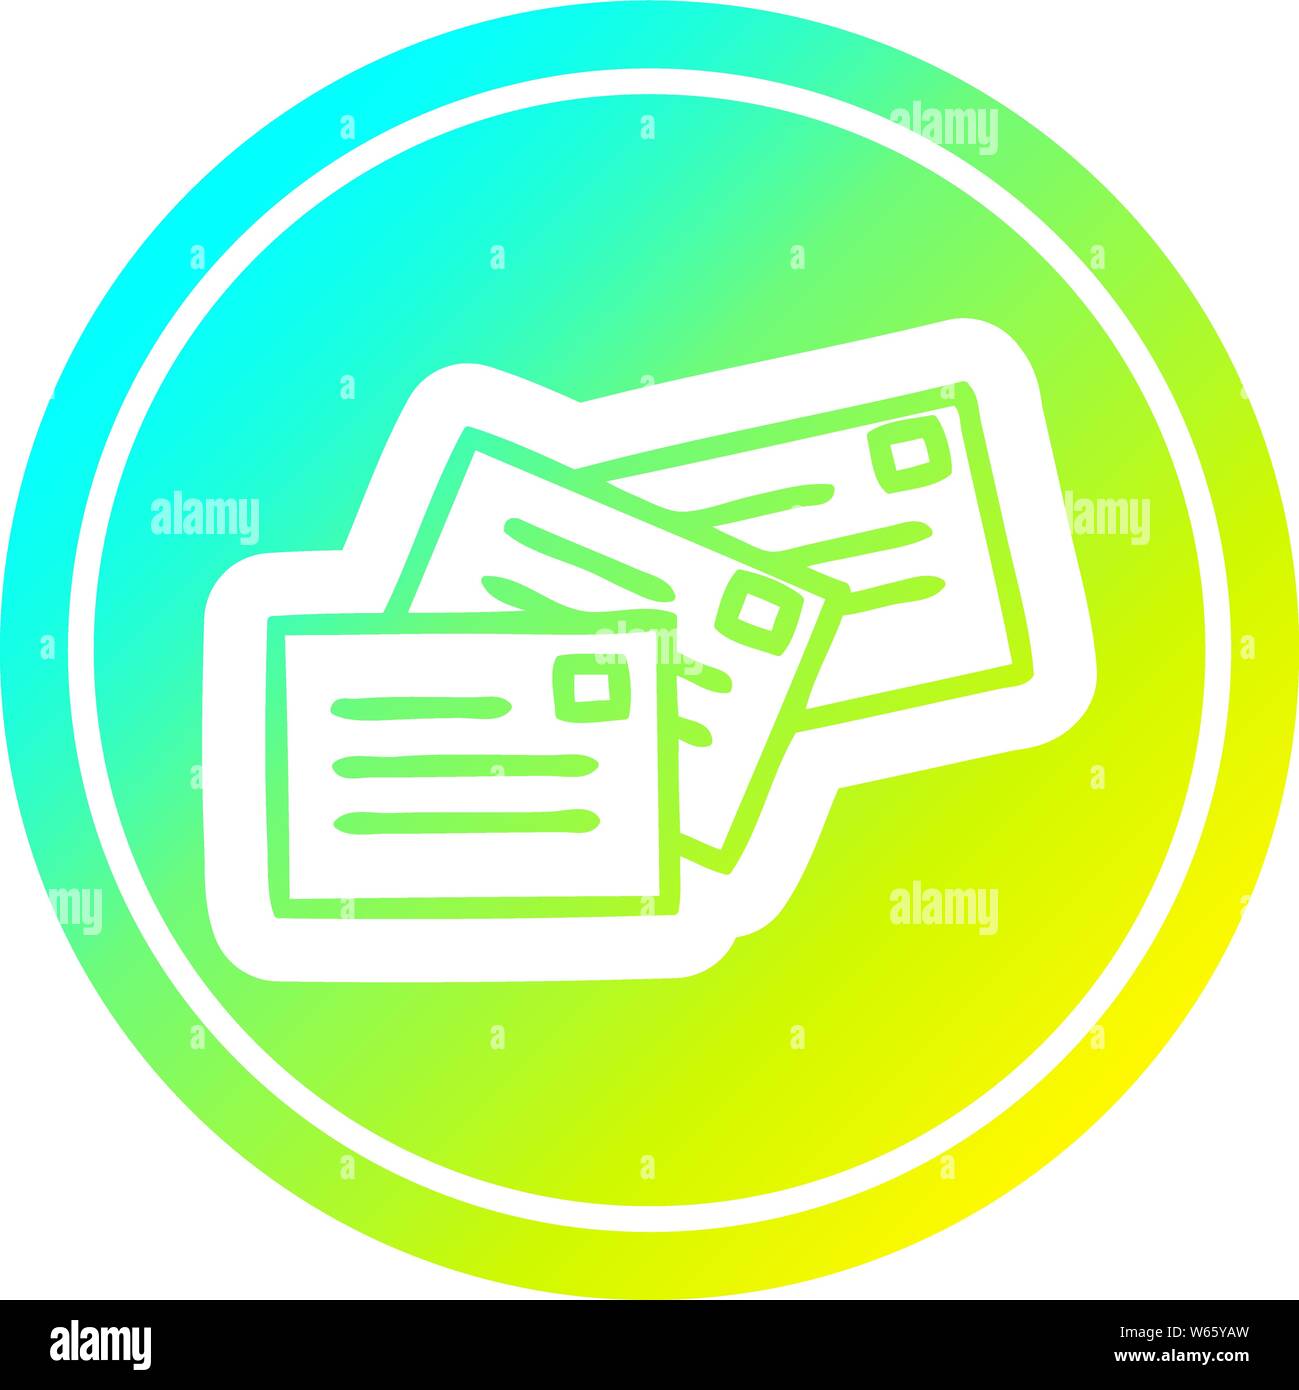 stack of letters circular icon with cool gradient finish Stock Vector